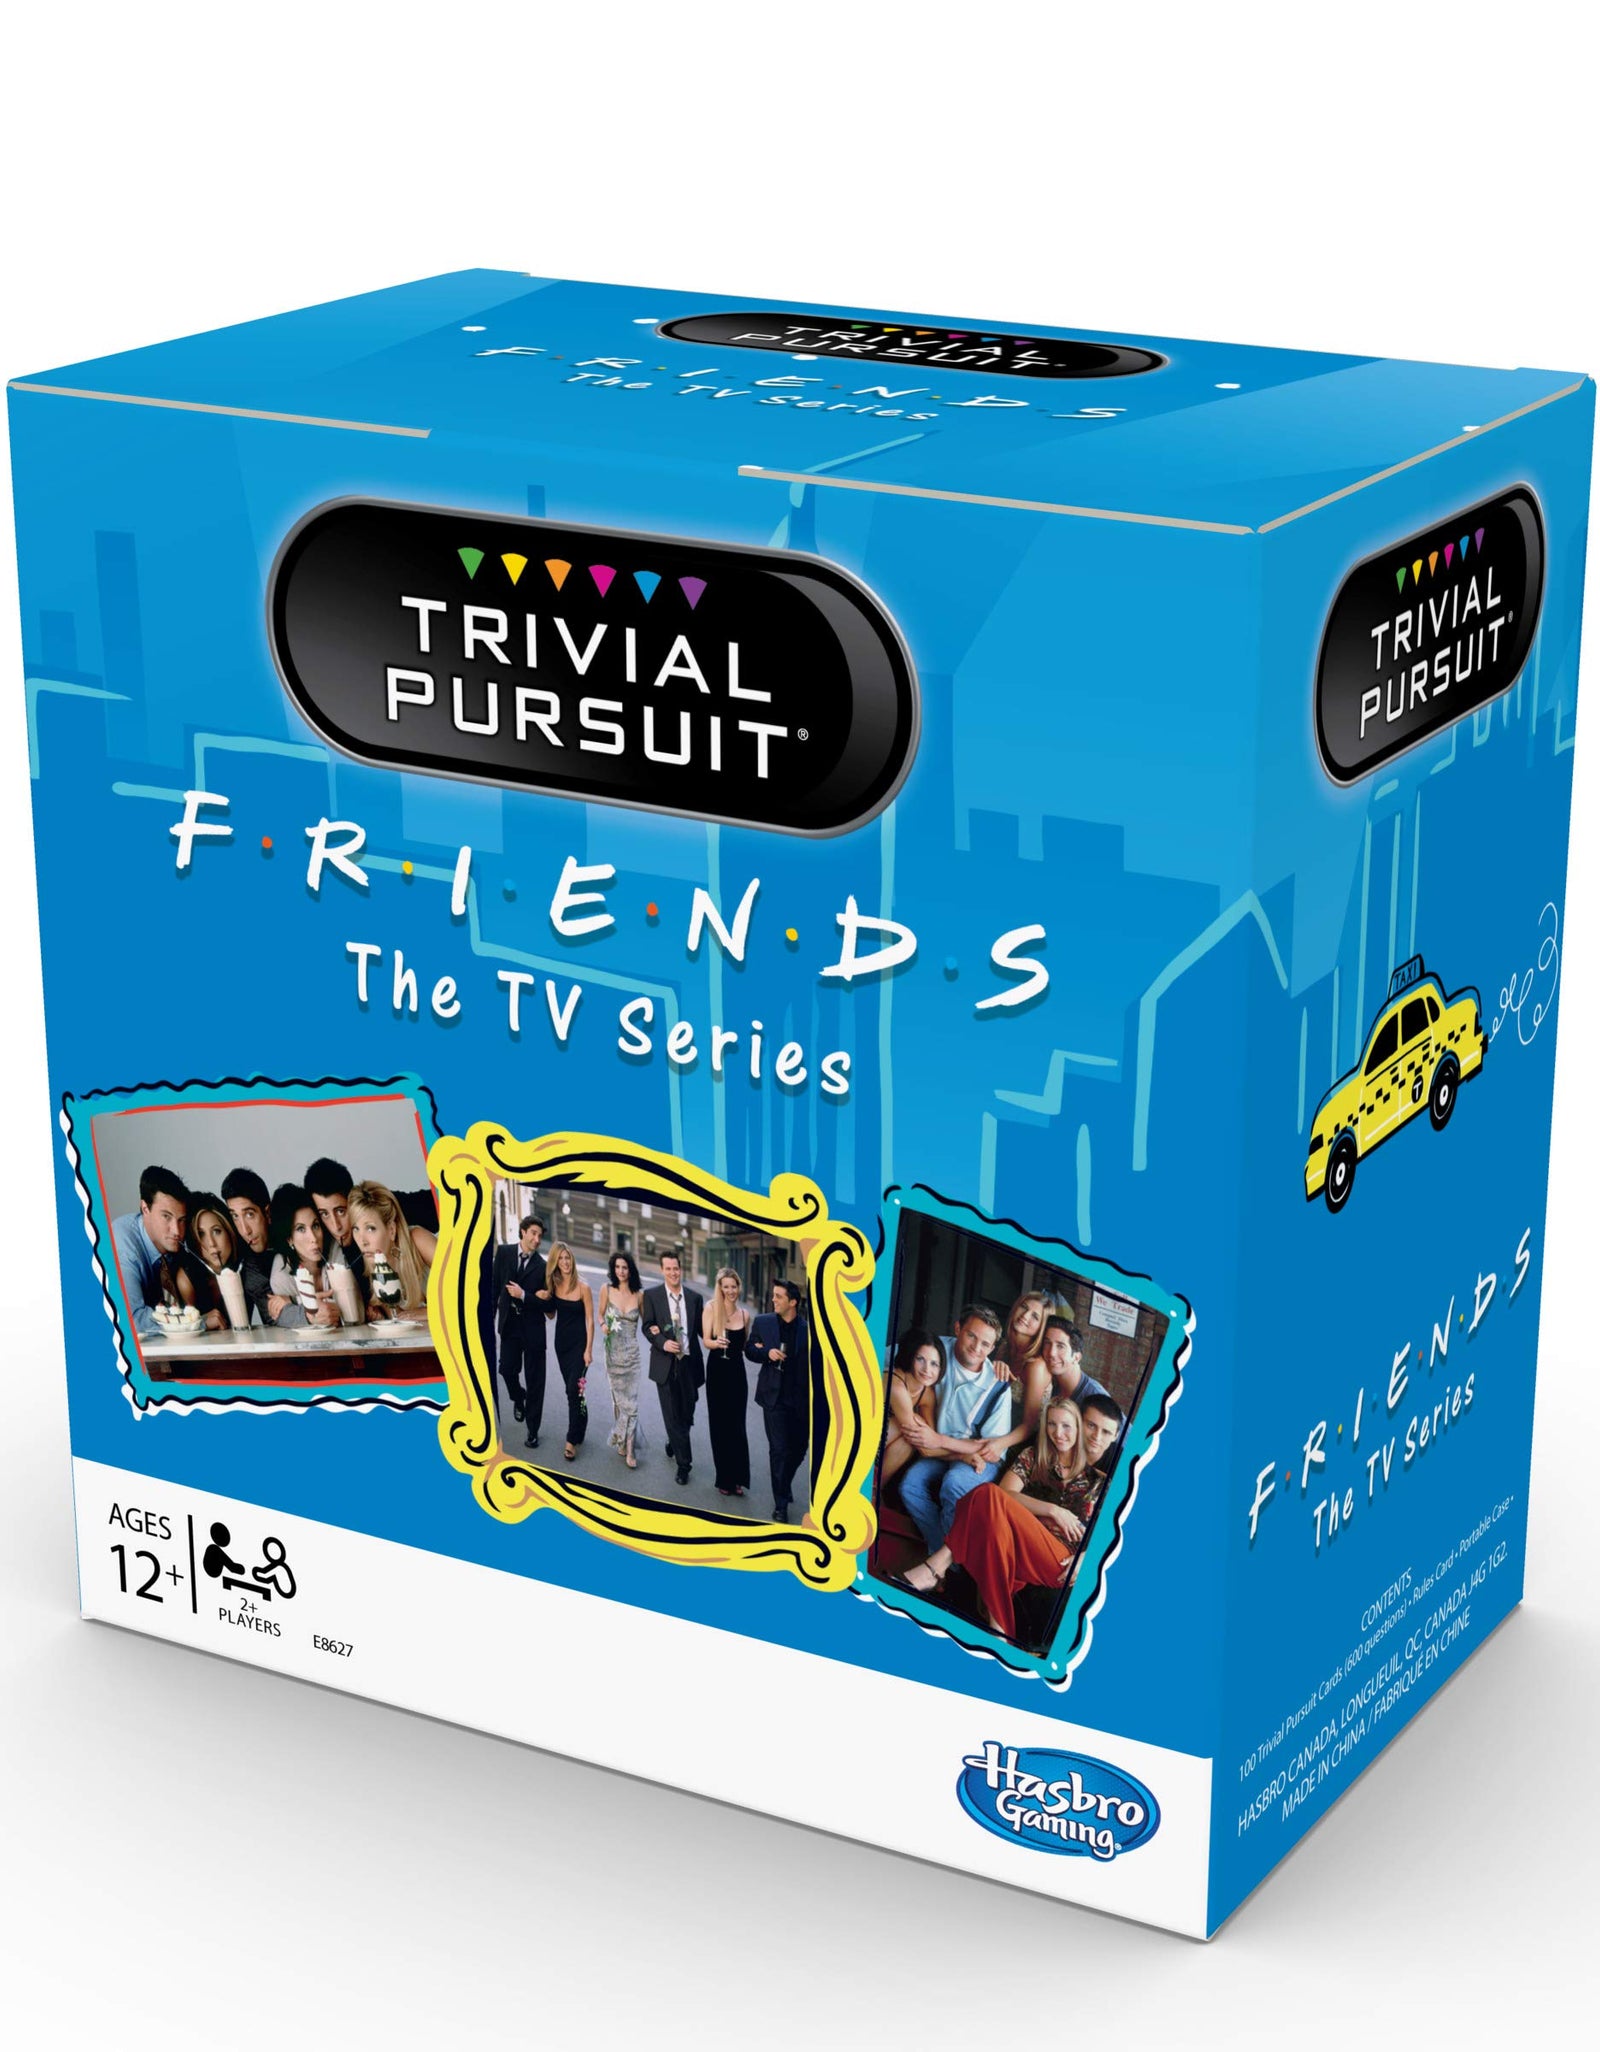 Hasbro Gaming Trivial Pursuit: Friends The TV Series Edition Trivia Party Game; 600 Trivia Questions for Tweens and Teens Ages 12 and Up (Amazon Exclusive)